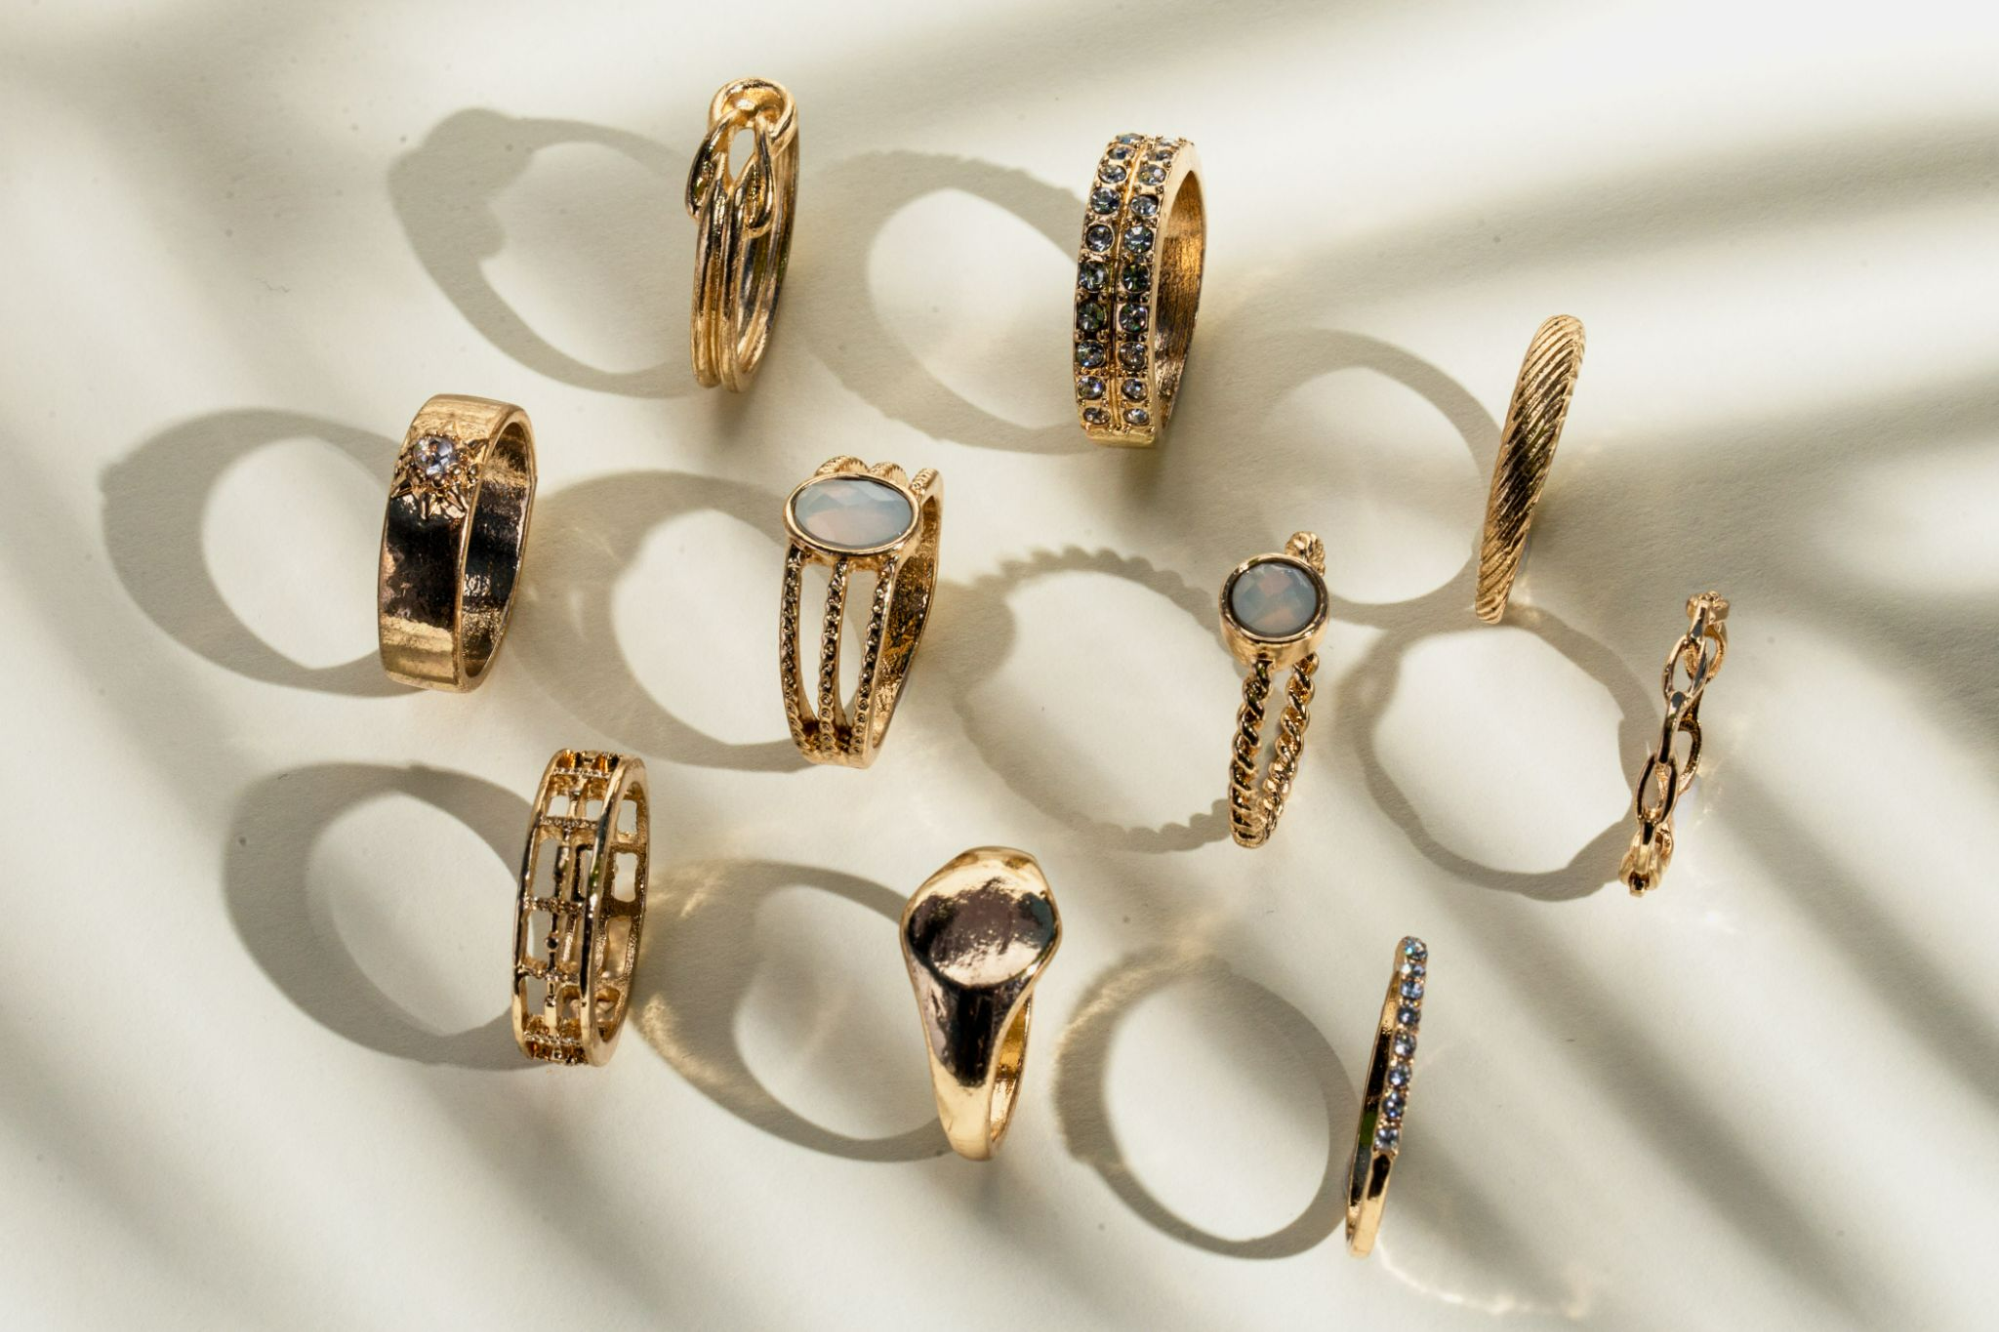 A set of gold stacking rings in a variety of styles, sizes and textures 